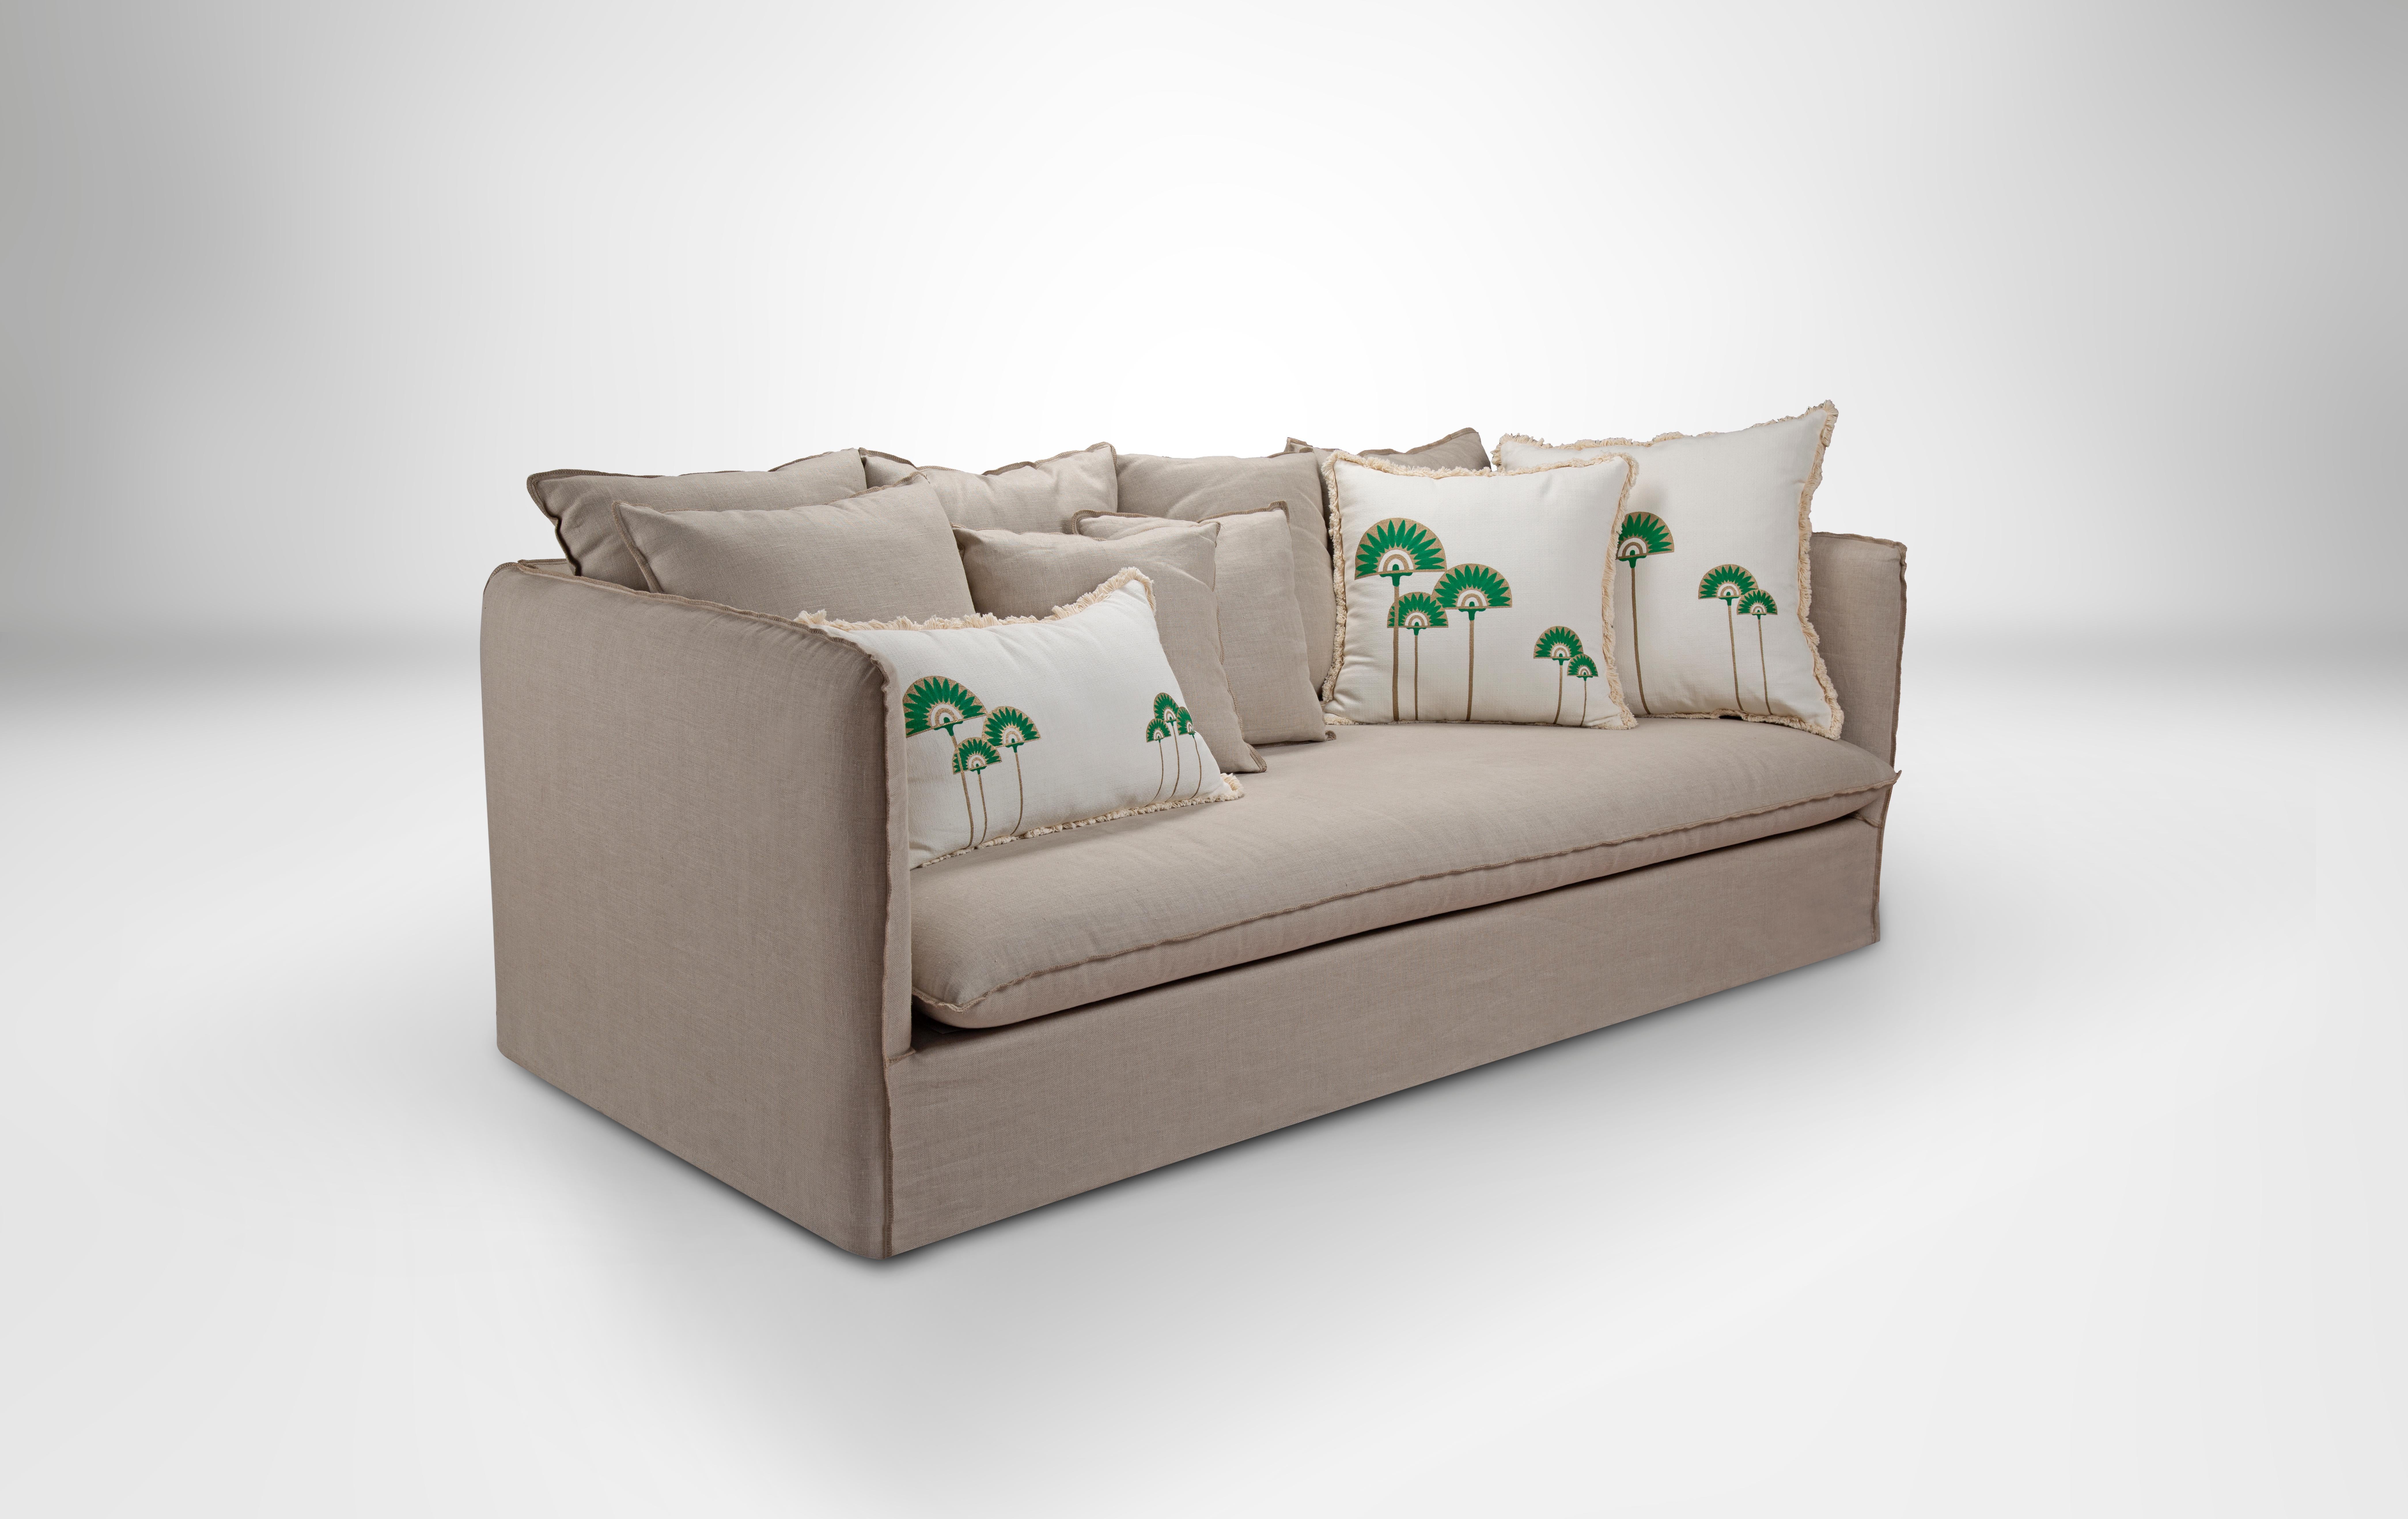 Super Comfortable Slip-on 3-Seater Sofa with Modern Upholstery Detailing. 
Adding texture and details makes all the difference to our Rustic Slip-On sofa. The special inner foam and deep lines makes sitting on it feel like a warm hug. The 